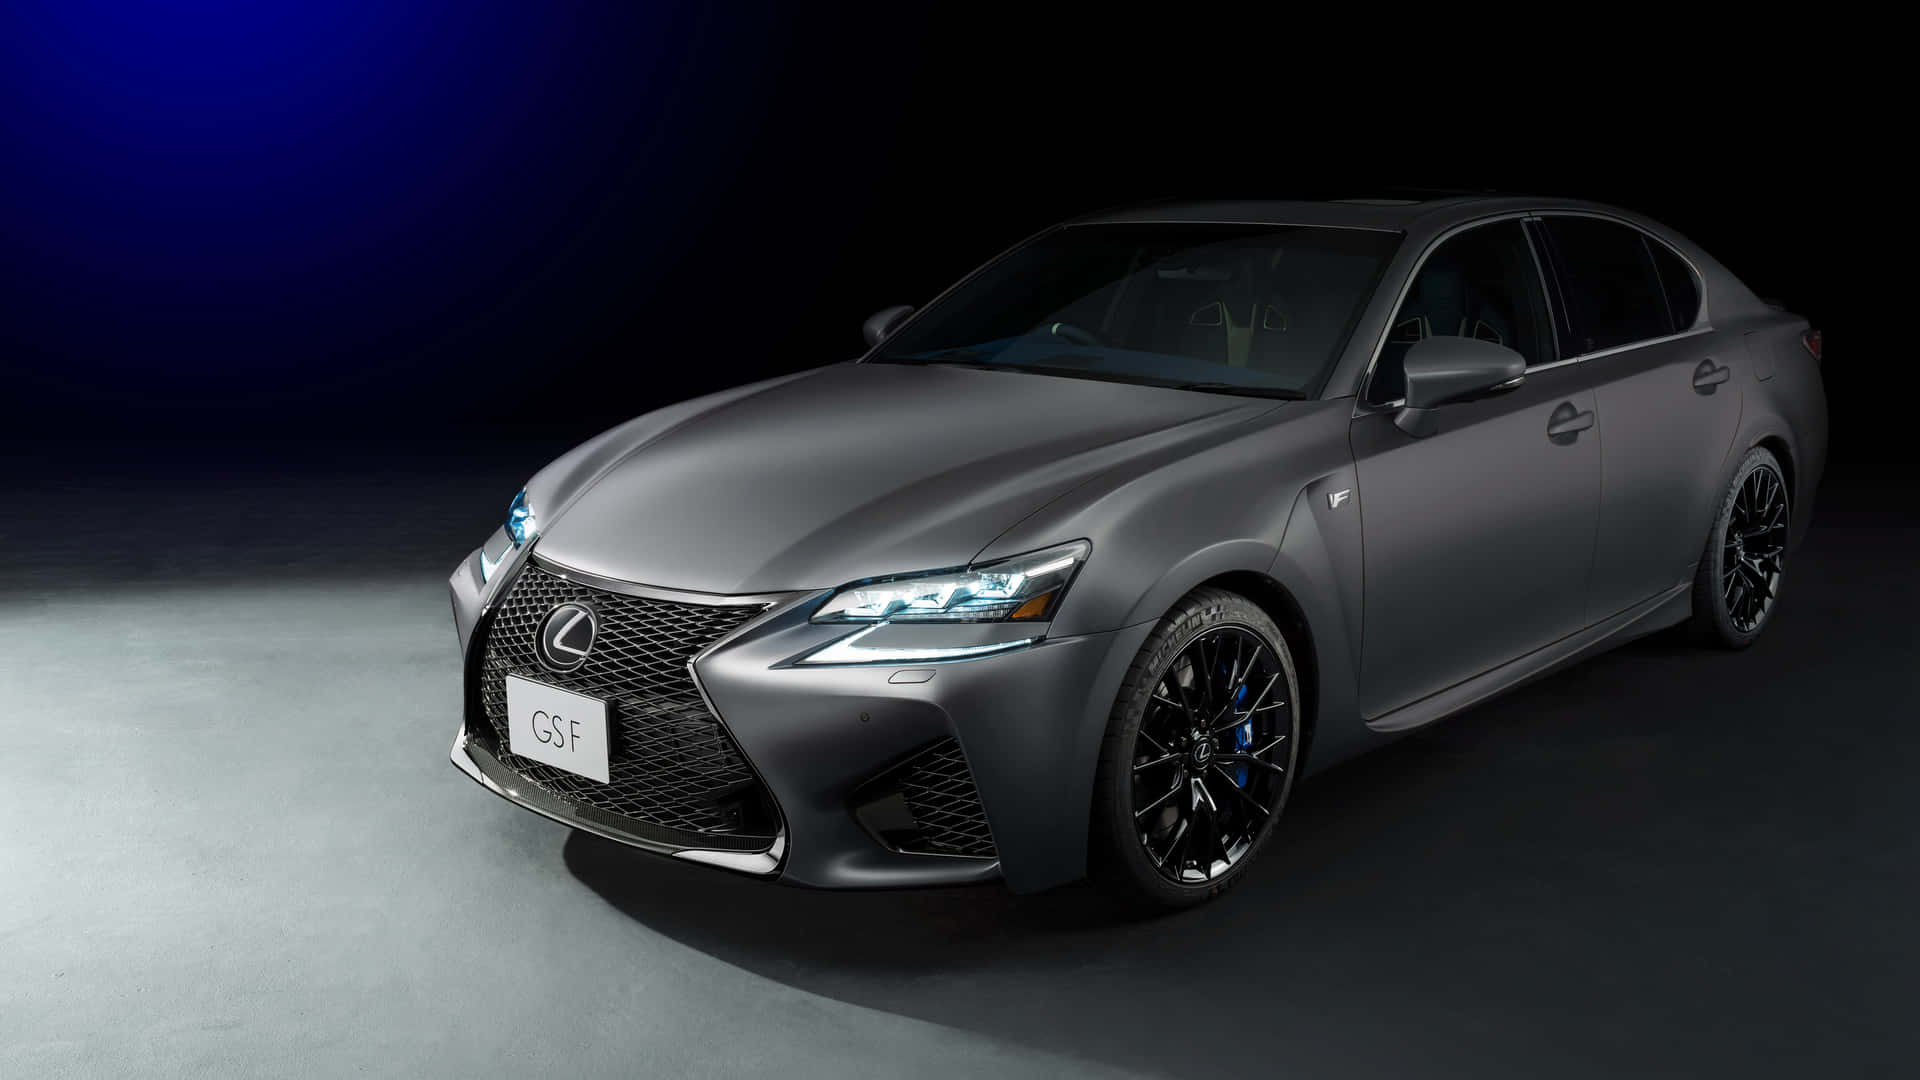 Lexus GS F - The Epitome of Luxury and Performance Wallpaper